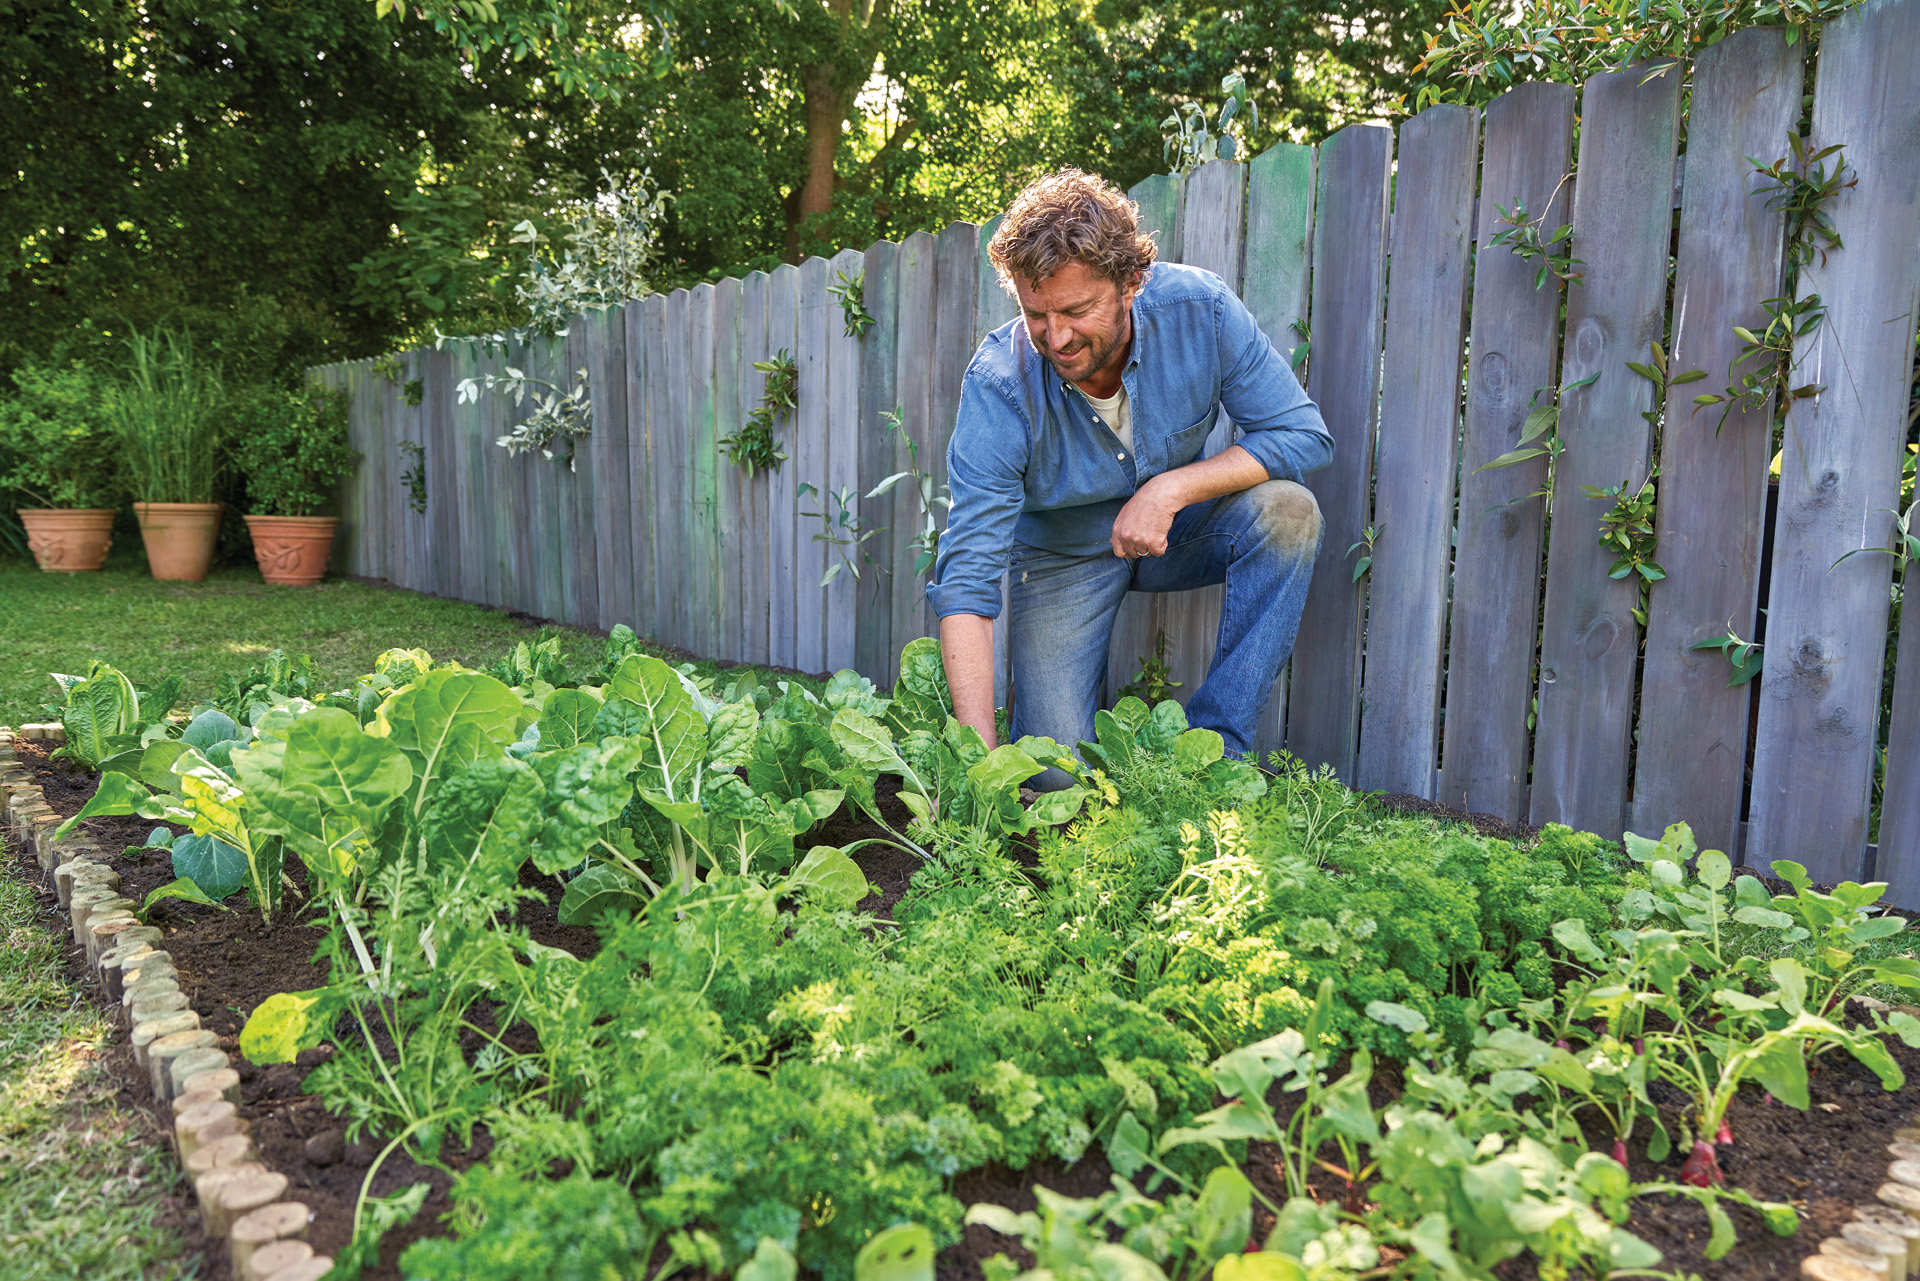 A man crouching in an abundant vegetable patch beside a wooden fence